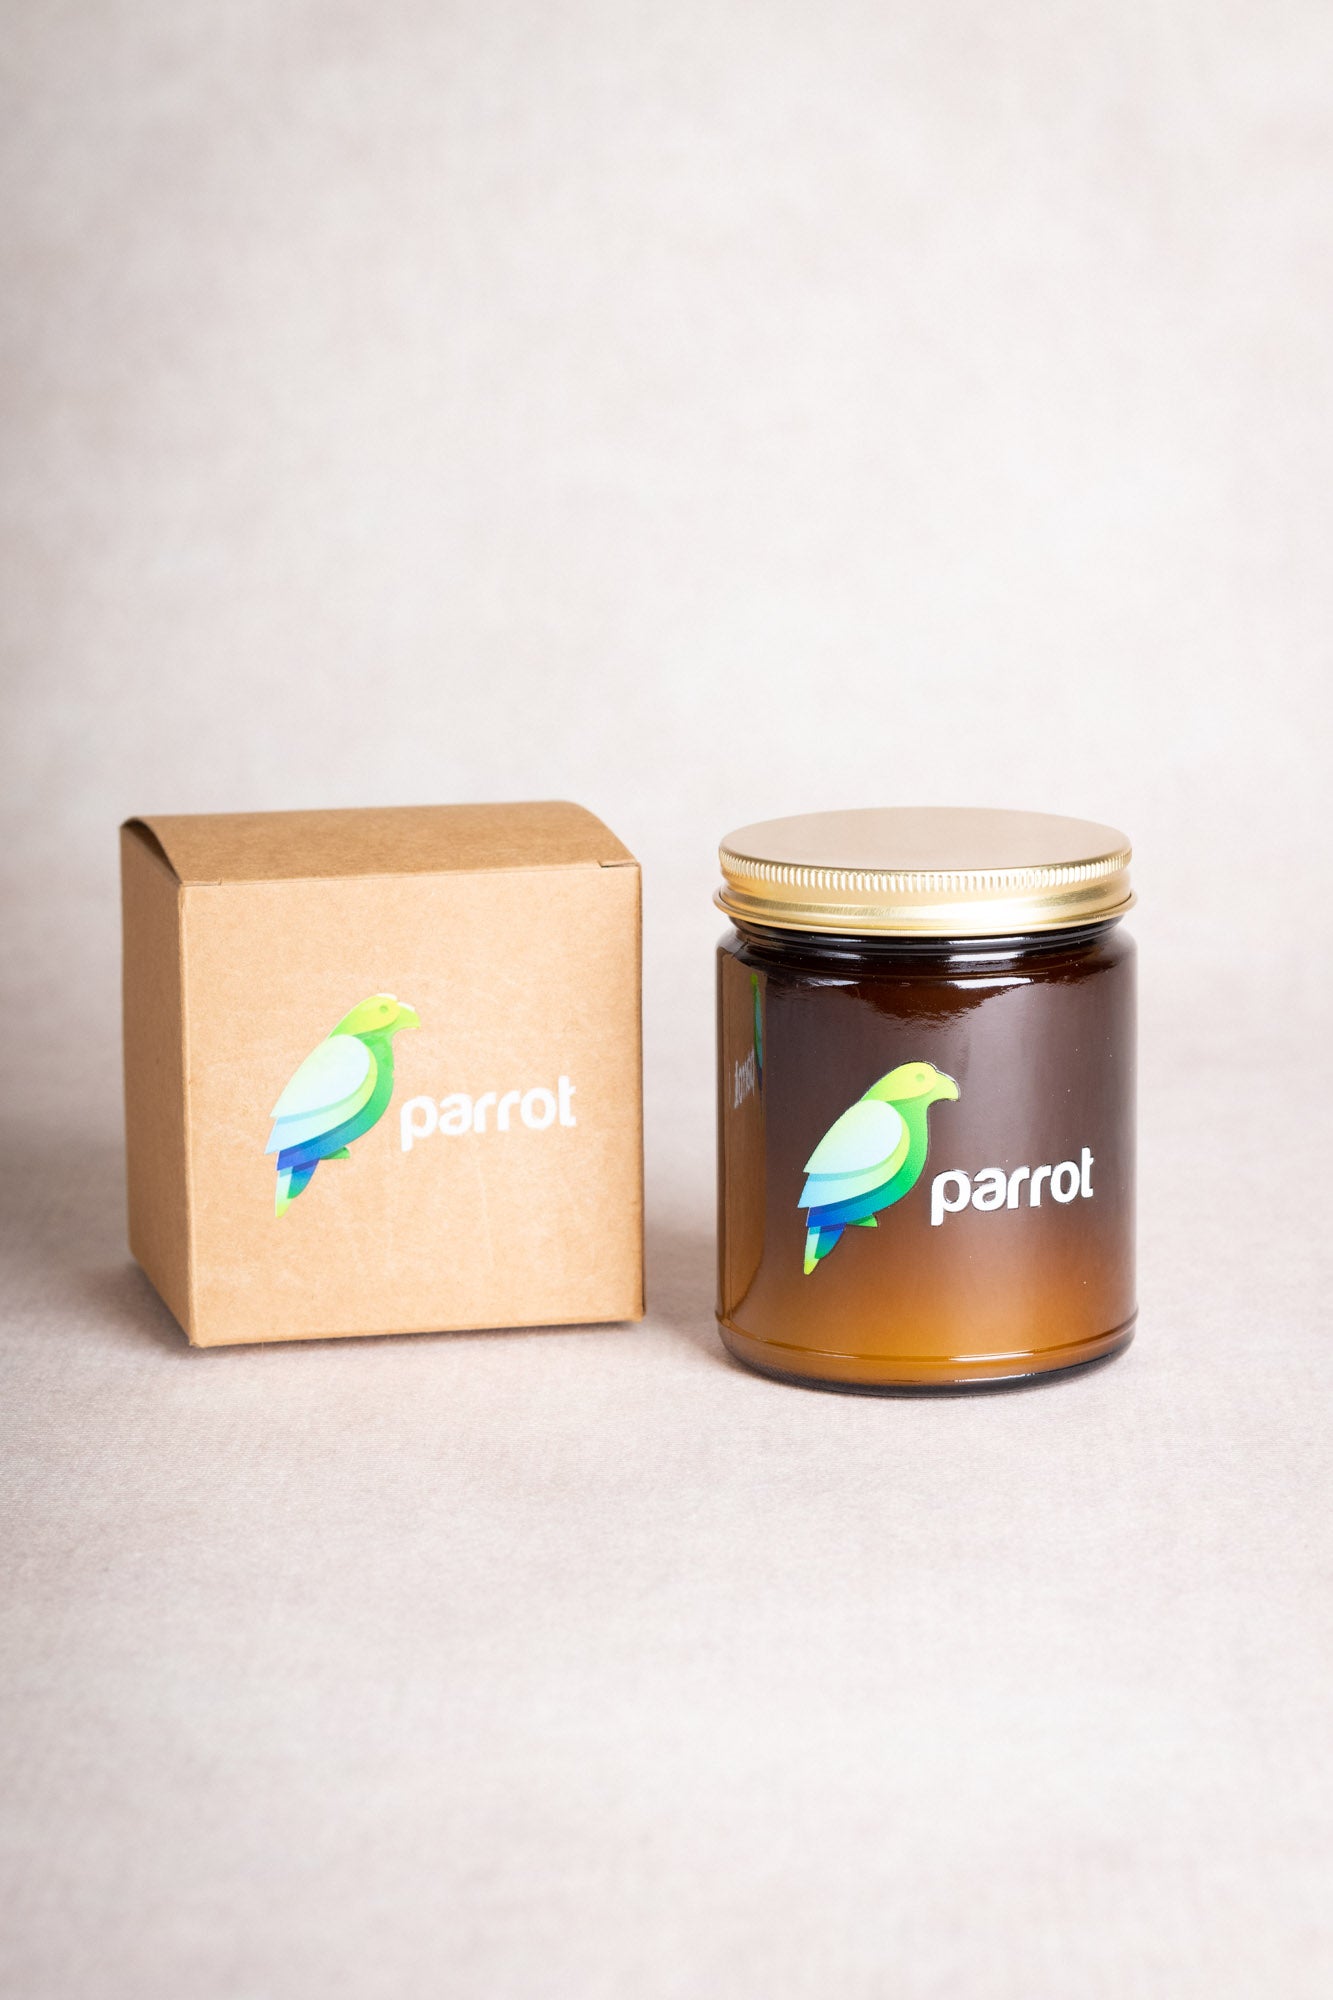 Premier Branded Candle Gifts for Valued Clients